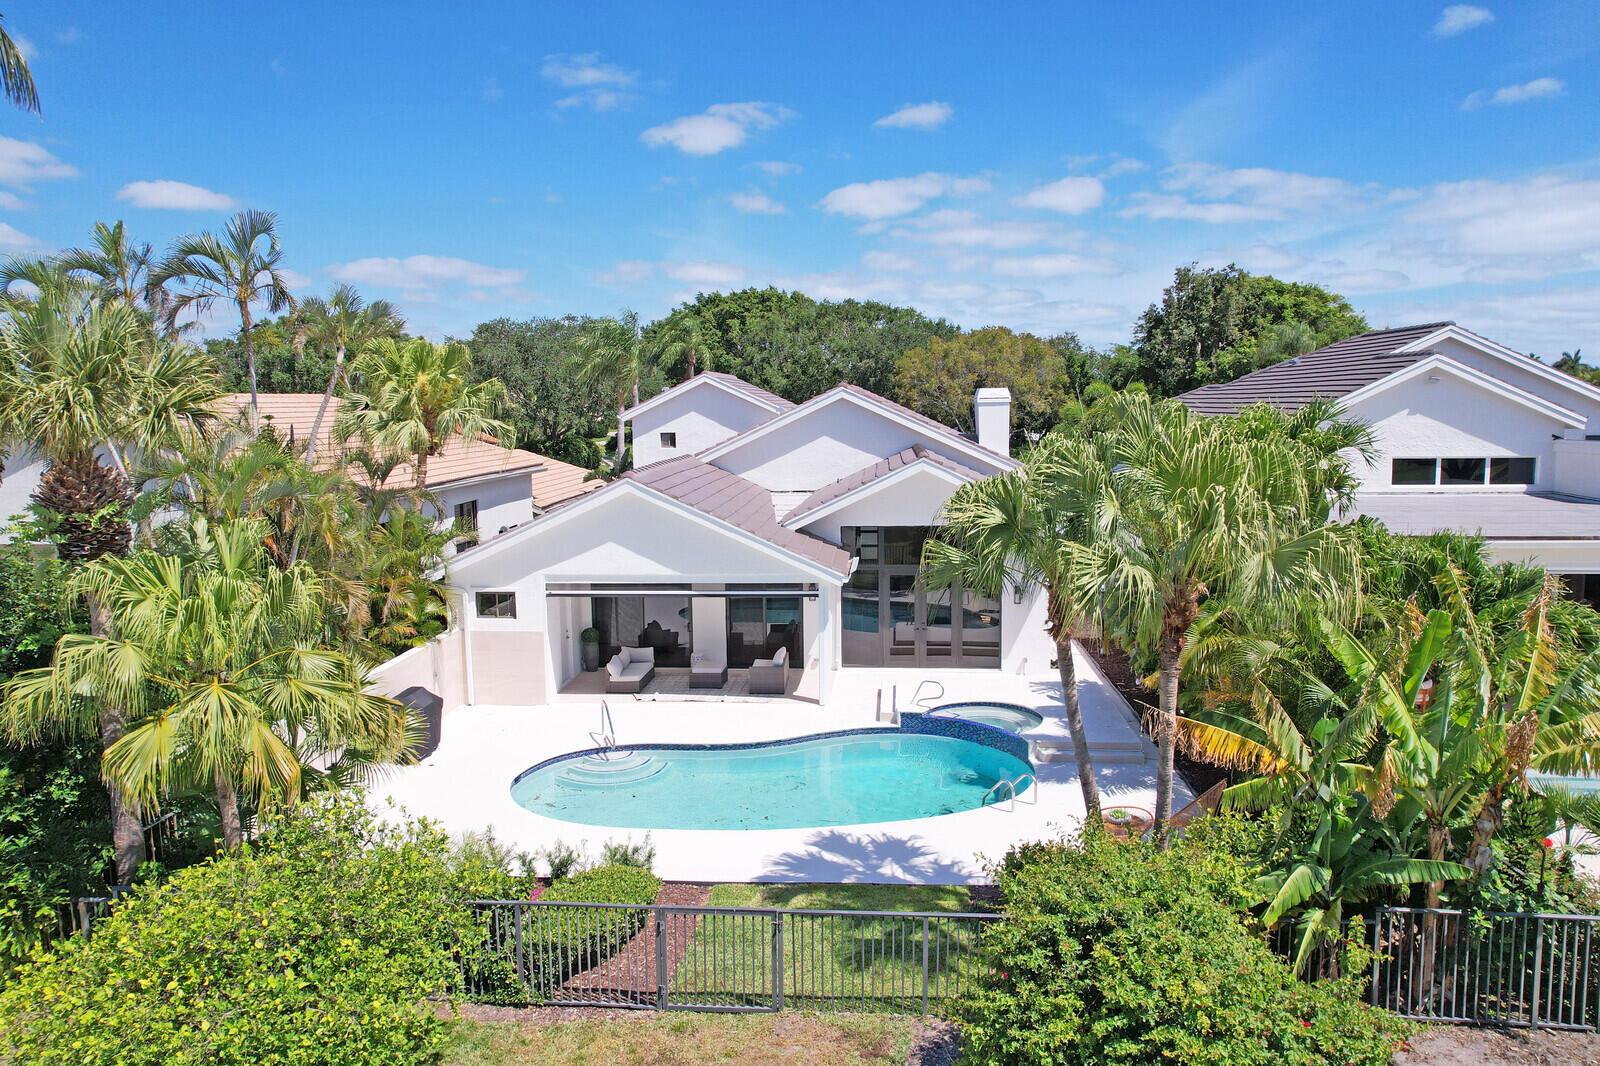 Completely renovated gem, including a new roof, in Frenchman's Creek.  Stunning views of the golf course. Primary suite is on the first floor with his and her baths. Beautiful pool /spa with  remote patio screens